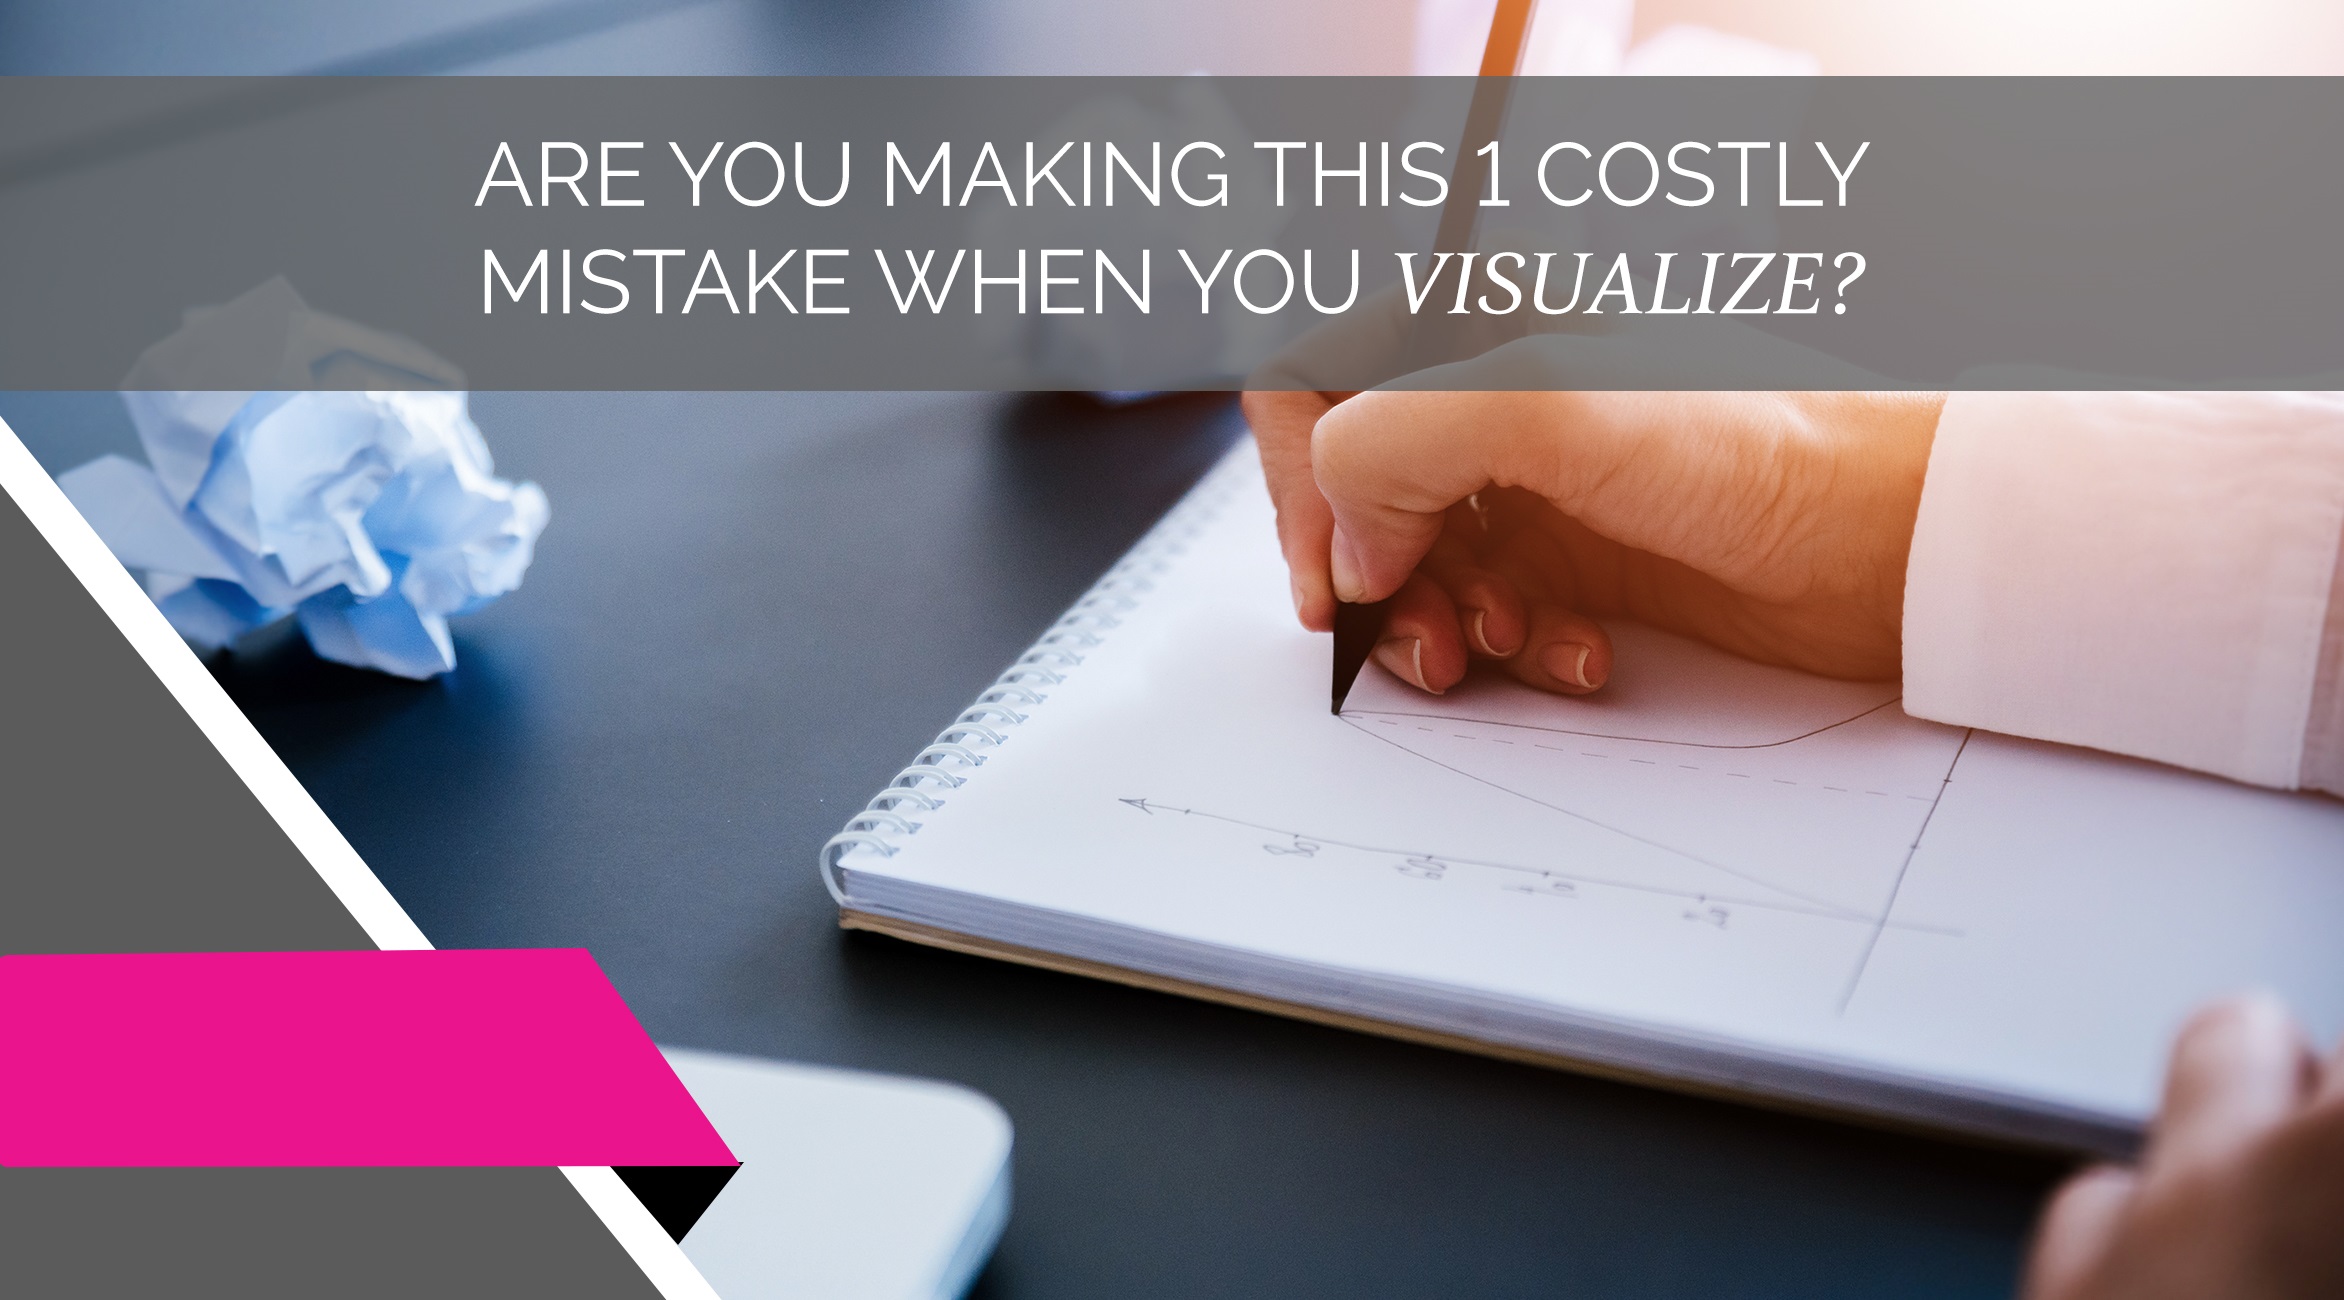 Are You Making This 1 Costly Mistake When You Visualize